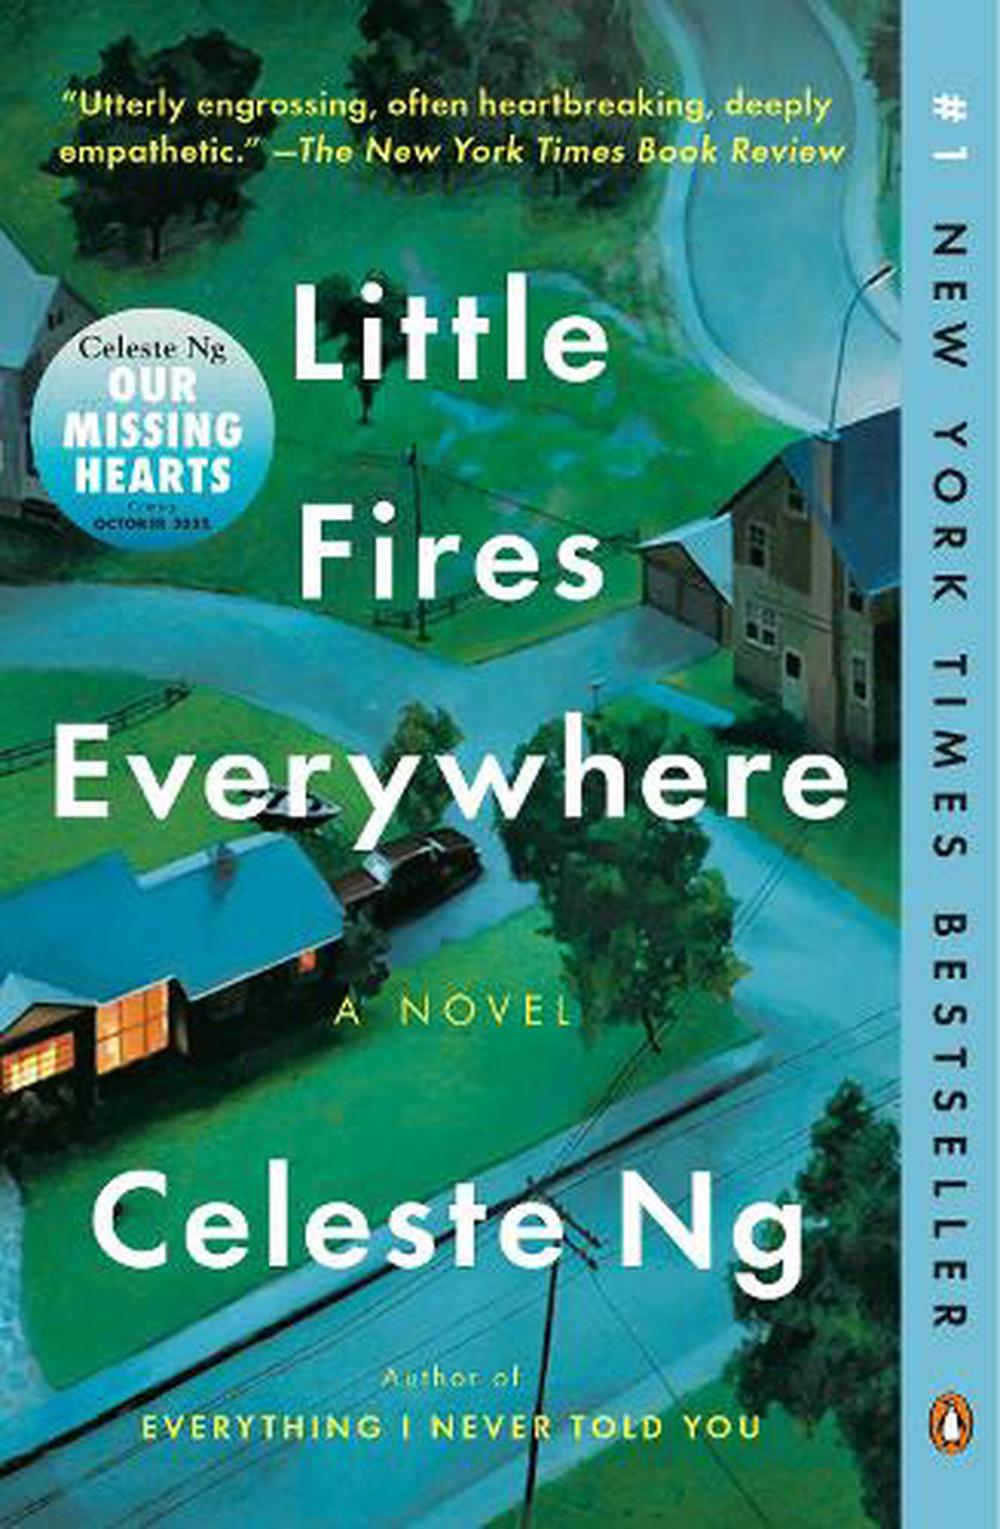 Little Fires Everywhere: A Novel by Celeste Ng (English) Paperback Book Free Shi 9780735224315 ...